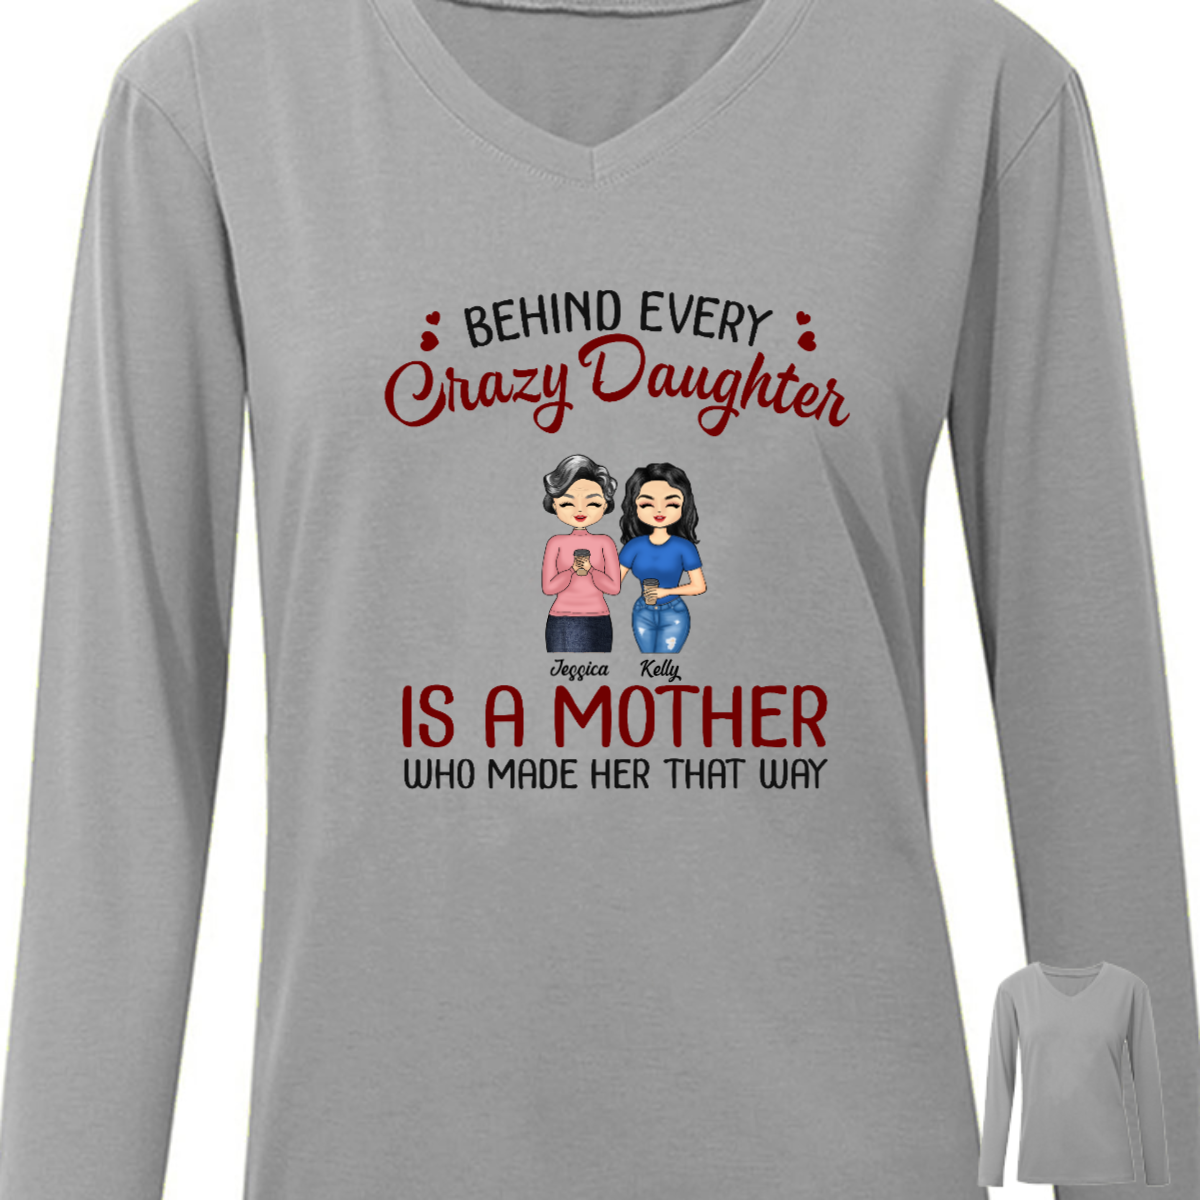 Behind Every Crazy Daughter Is A Mother - Gift For Family - Personalized Custom Long Sleeve Shirt